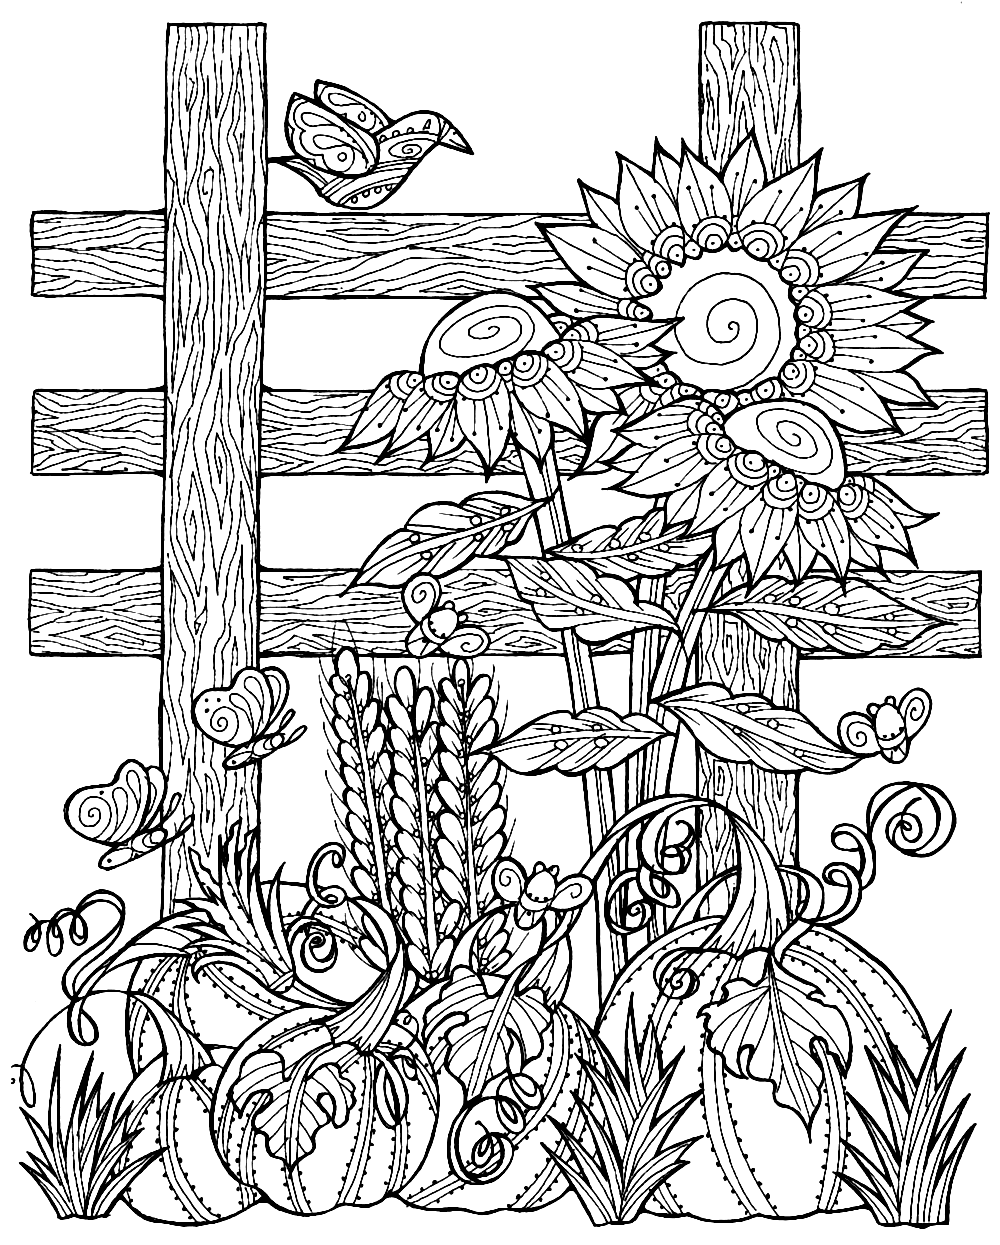 Pumpkin Patch Coloring Page for Adults